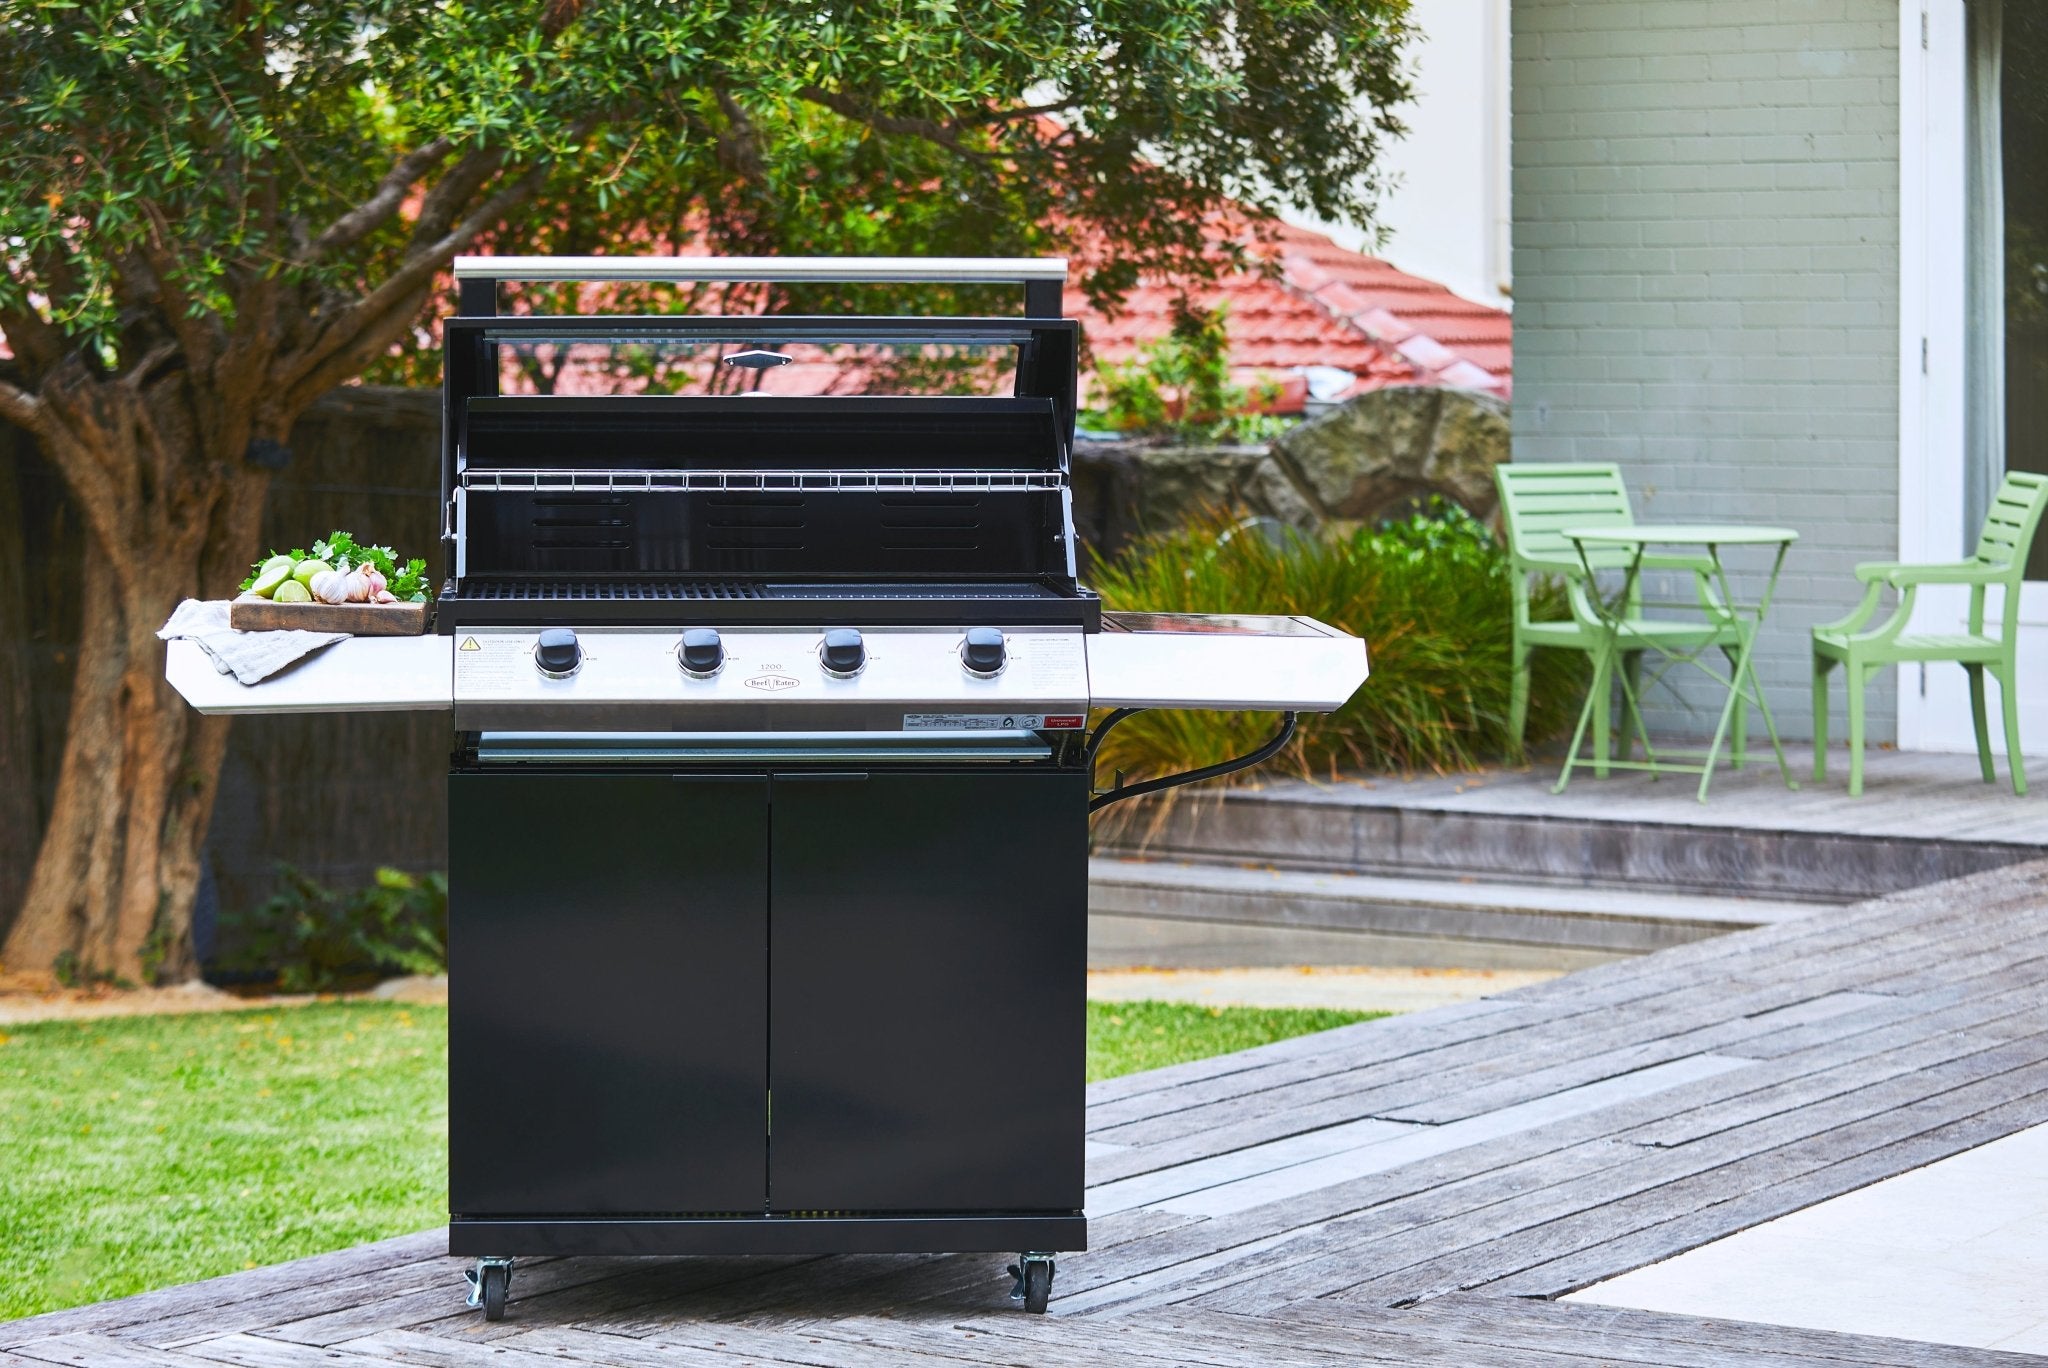 Beefeater 1200S Series - 5 Burner BBQ & Side Burner Trolley - The Outdoor Kitchen Company Ltd